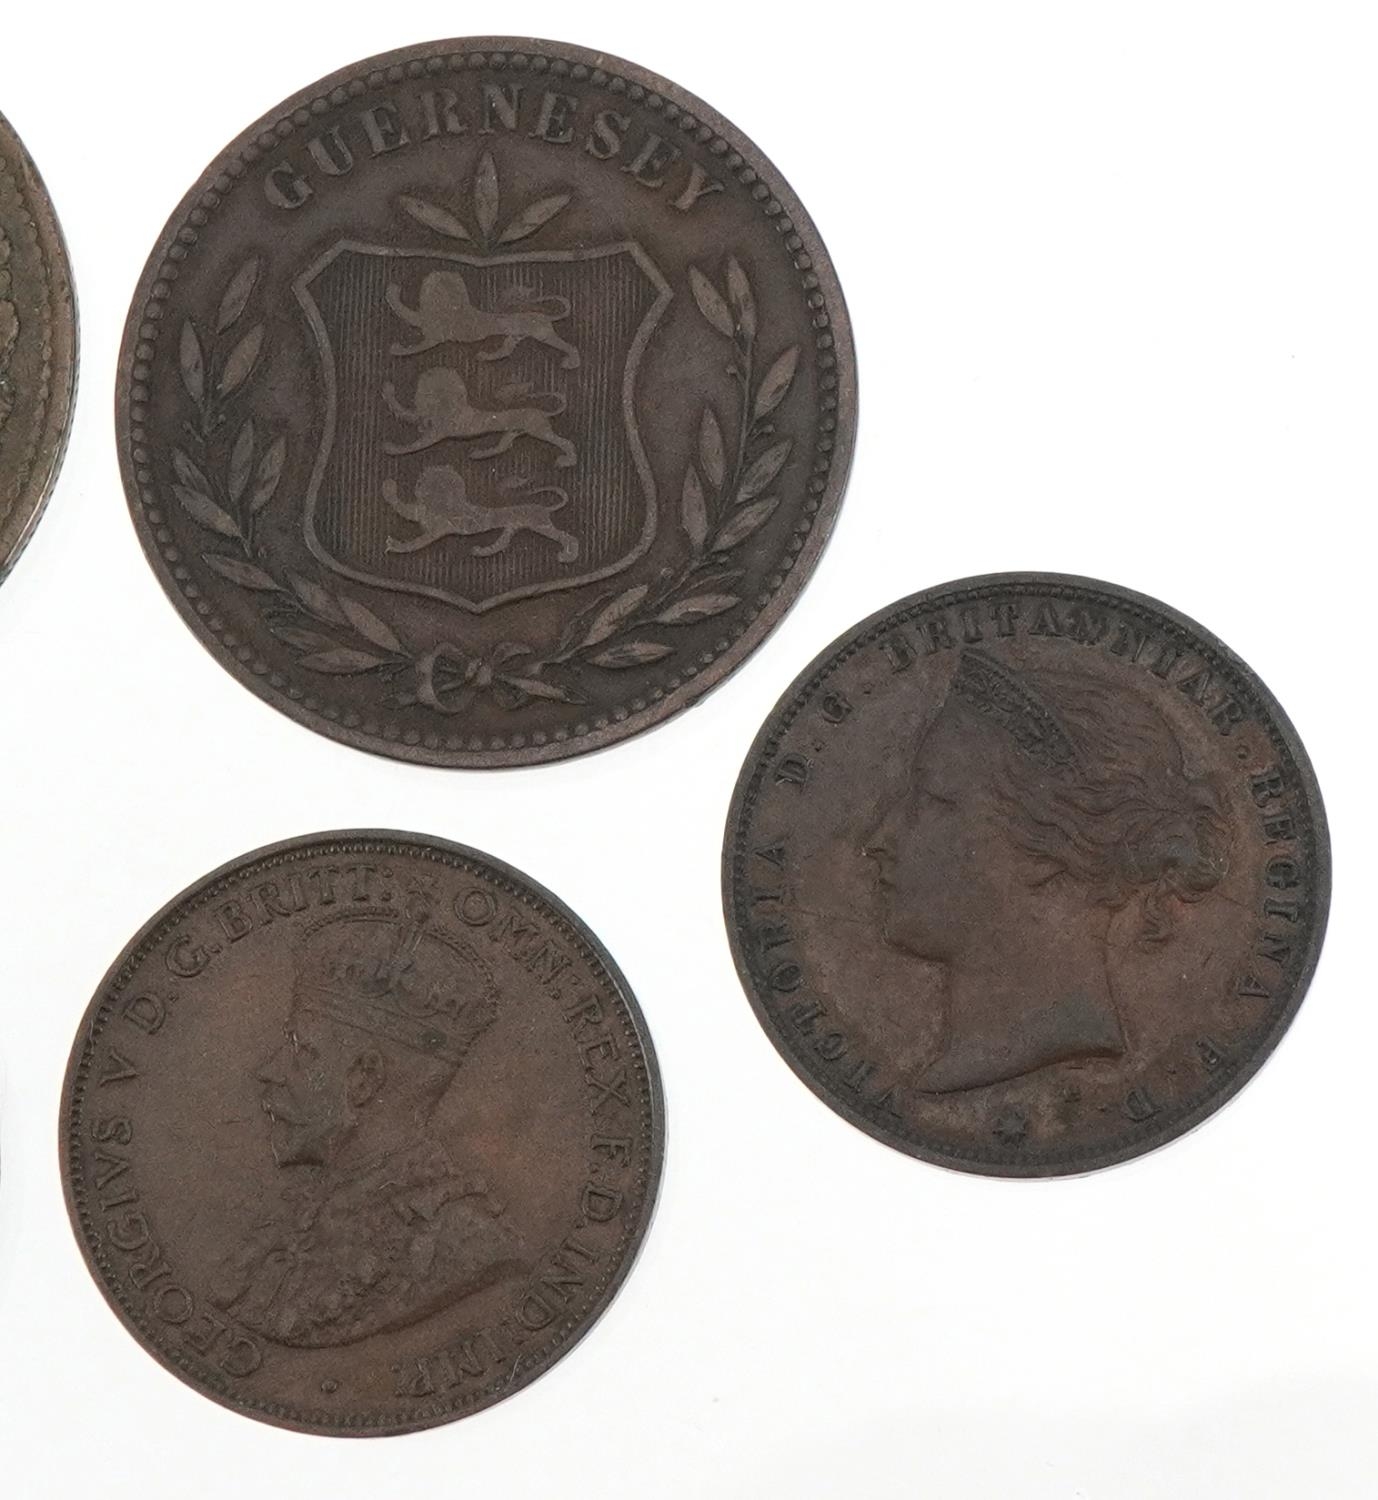 Copper coinage including George III 1797 two pence - Image 3 of 6